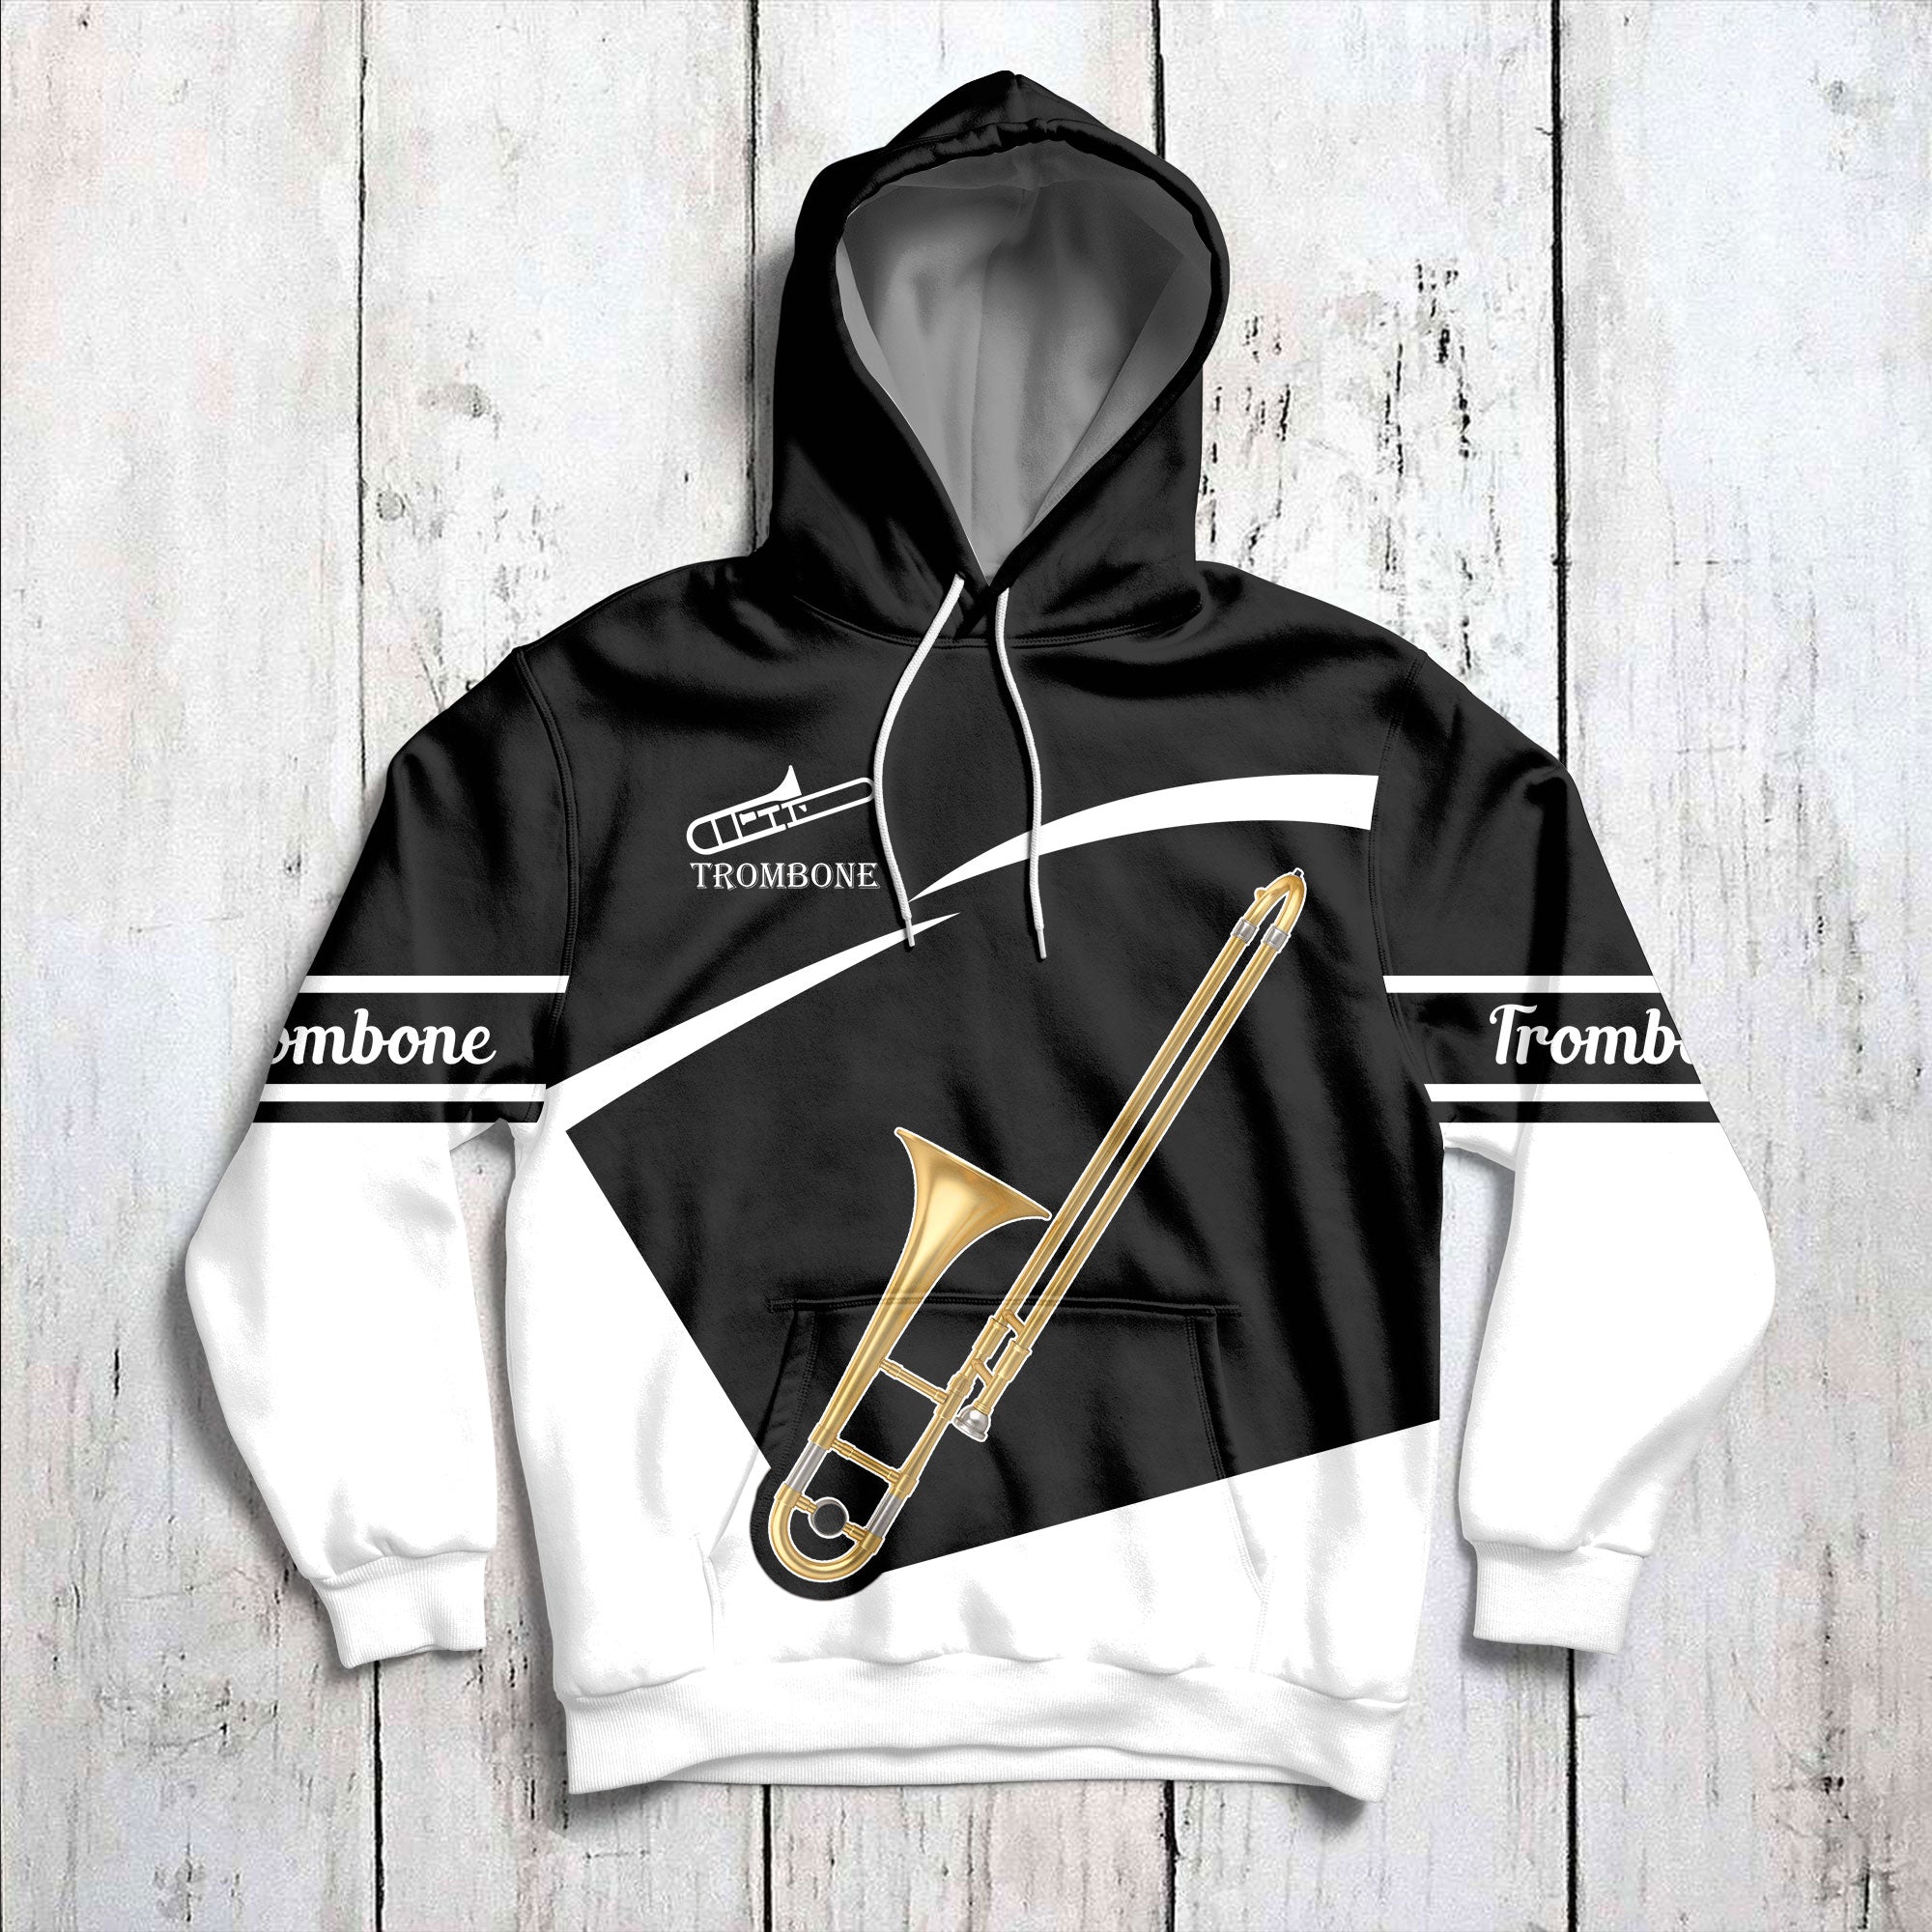 Trombone Black White Pullover Premium Hoodie, Perfect Outfit For Men And Women On Christmas New Year Autumn Winter